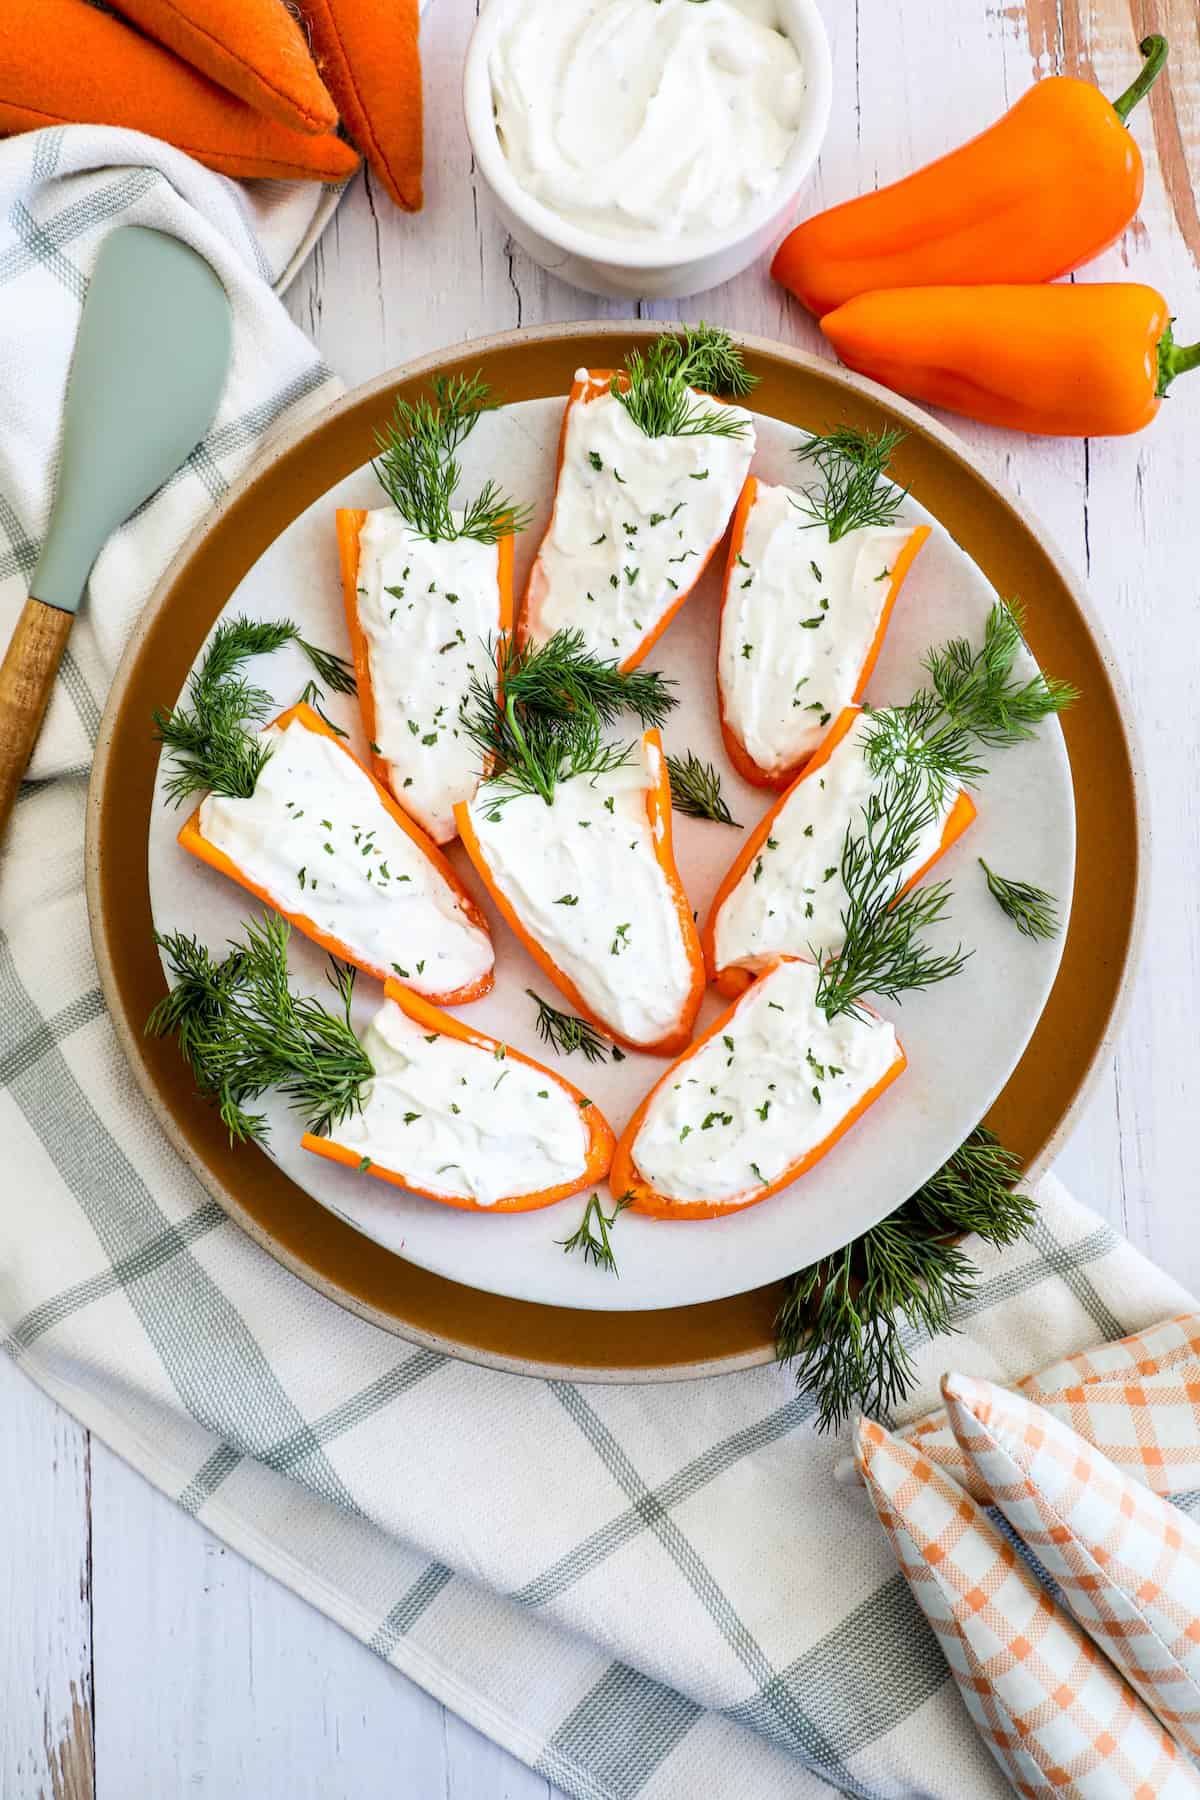 A plate with carrots and sour cream.